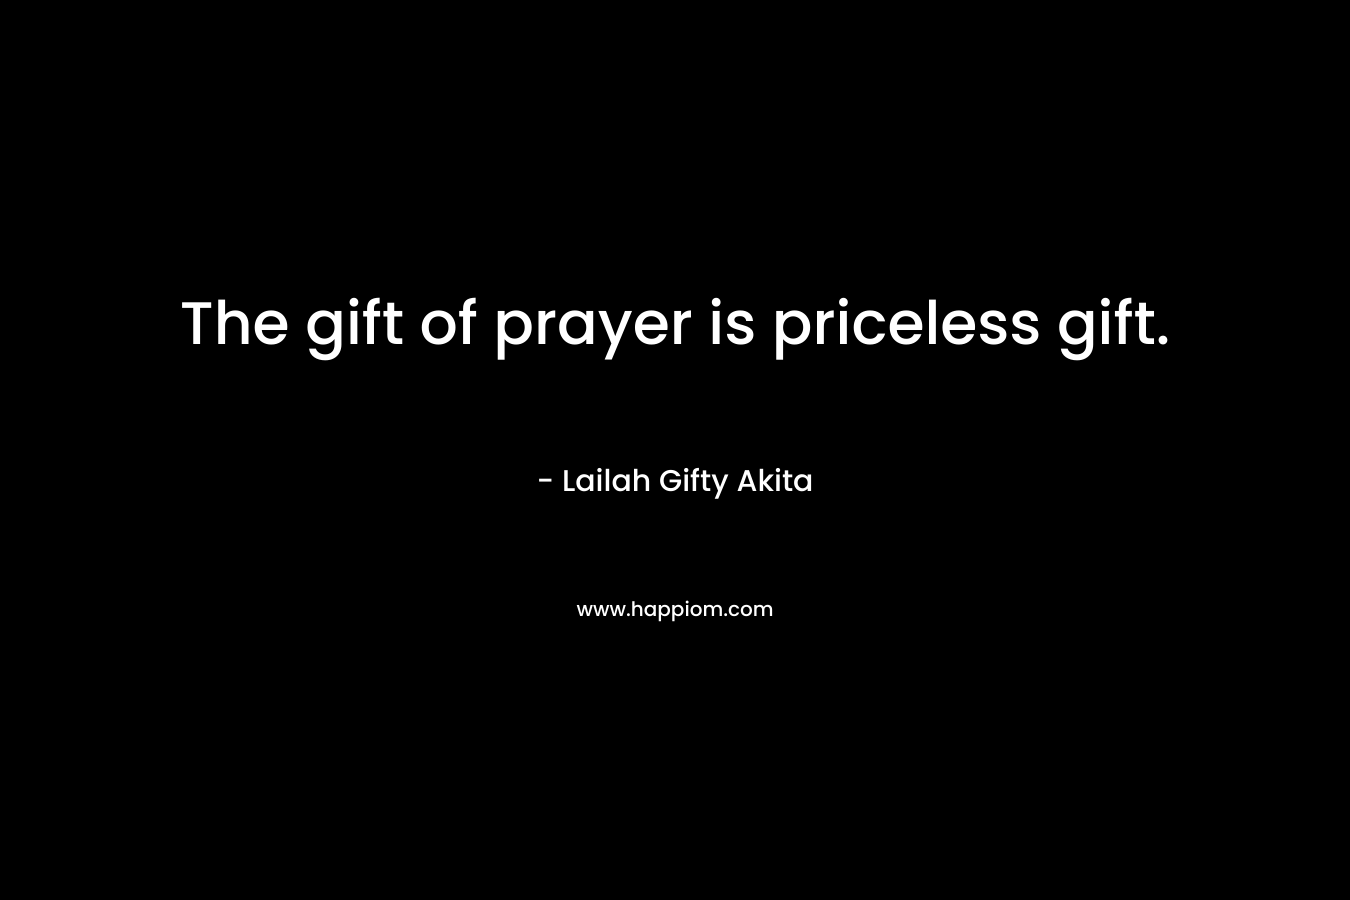 The gift of prayer is priceless gift.